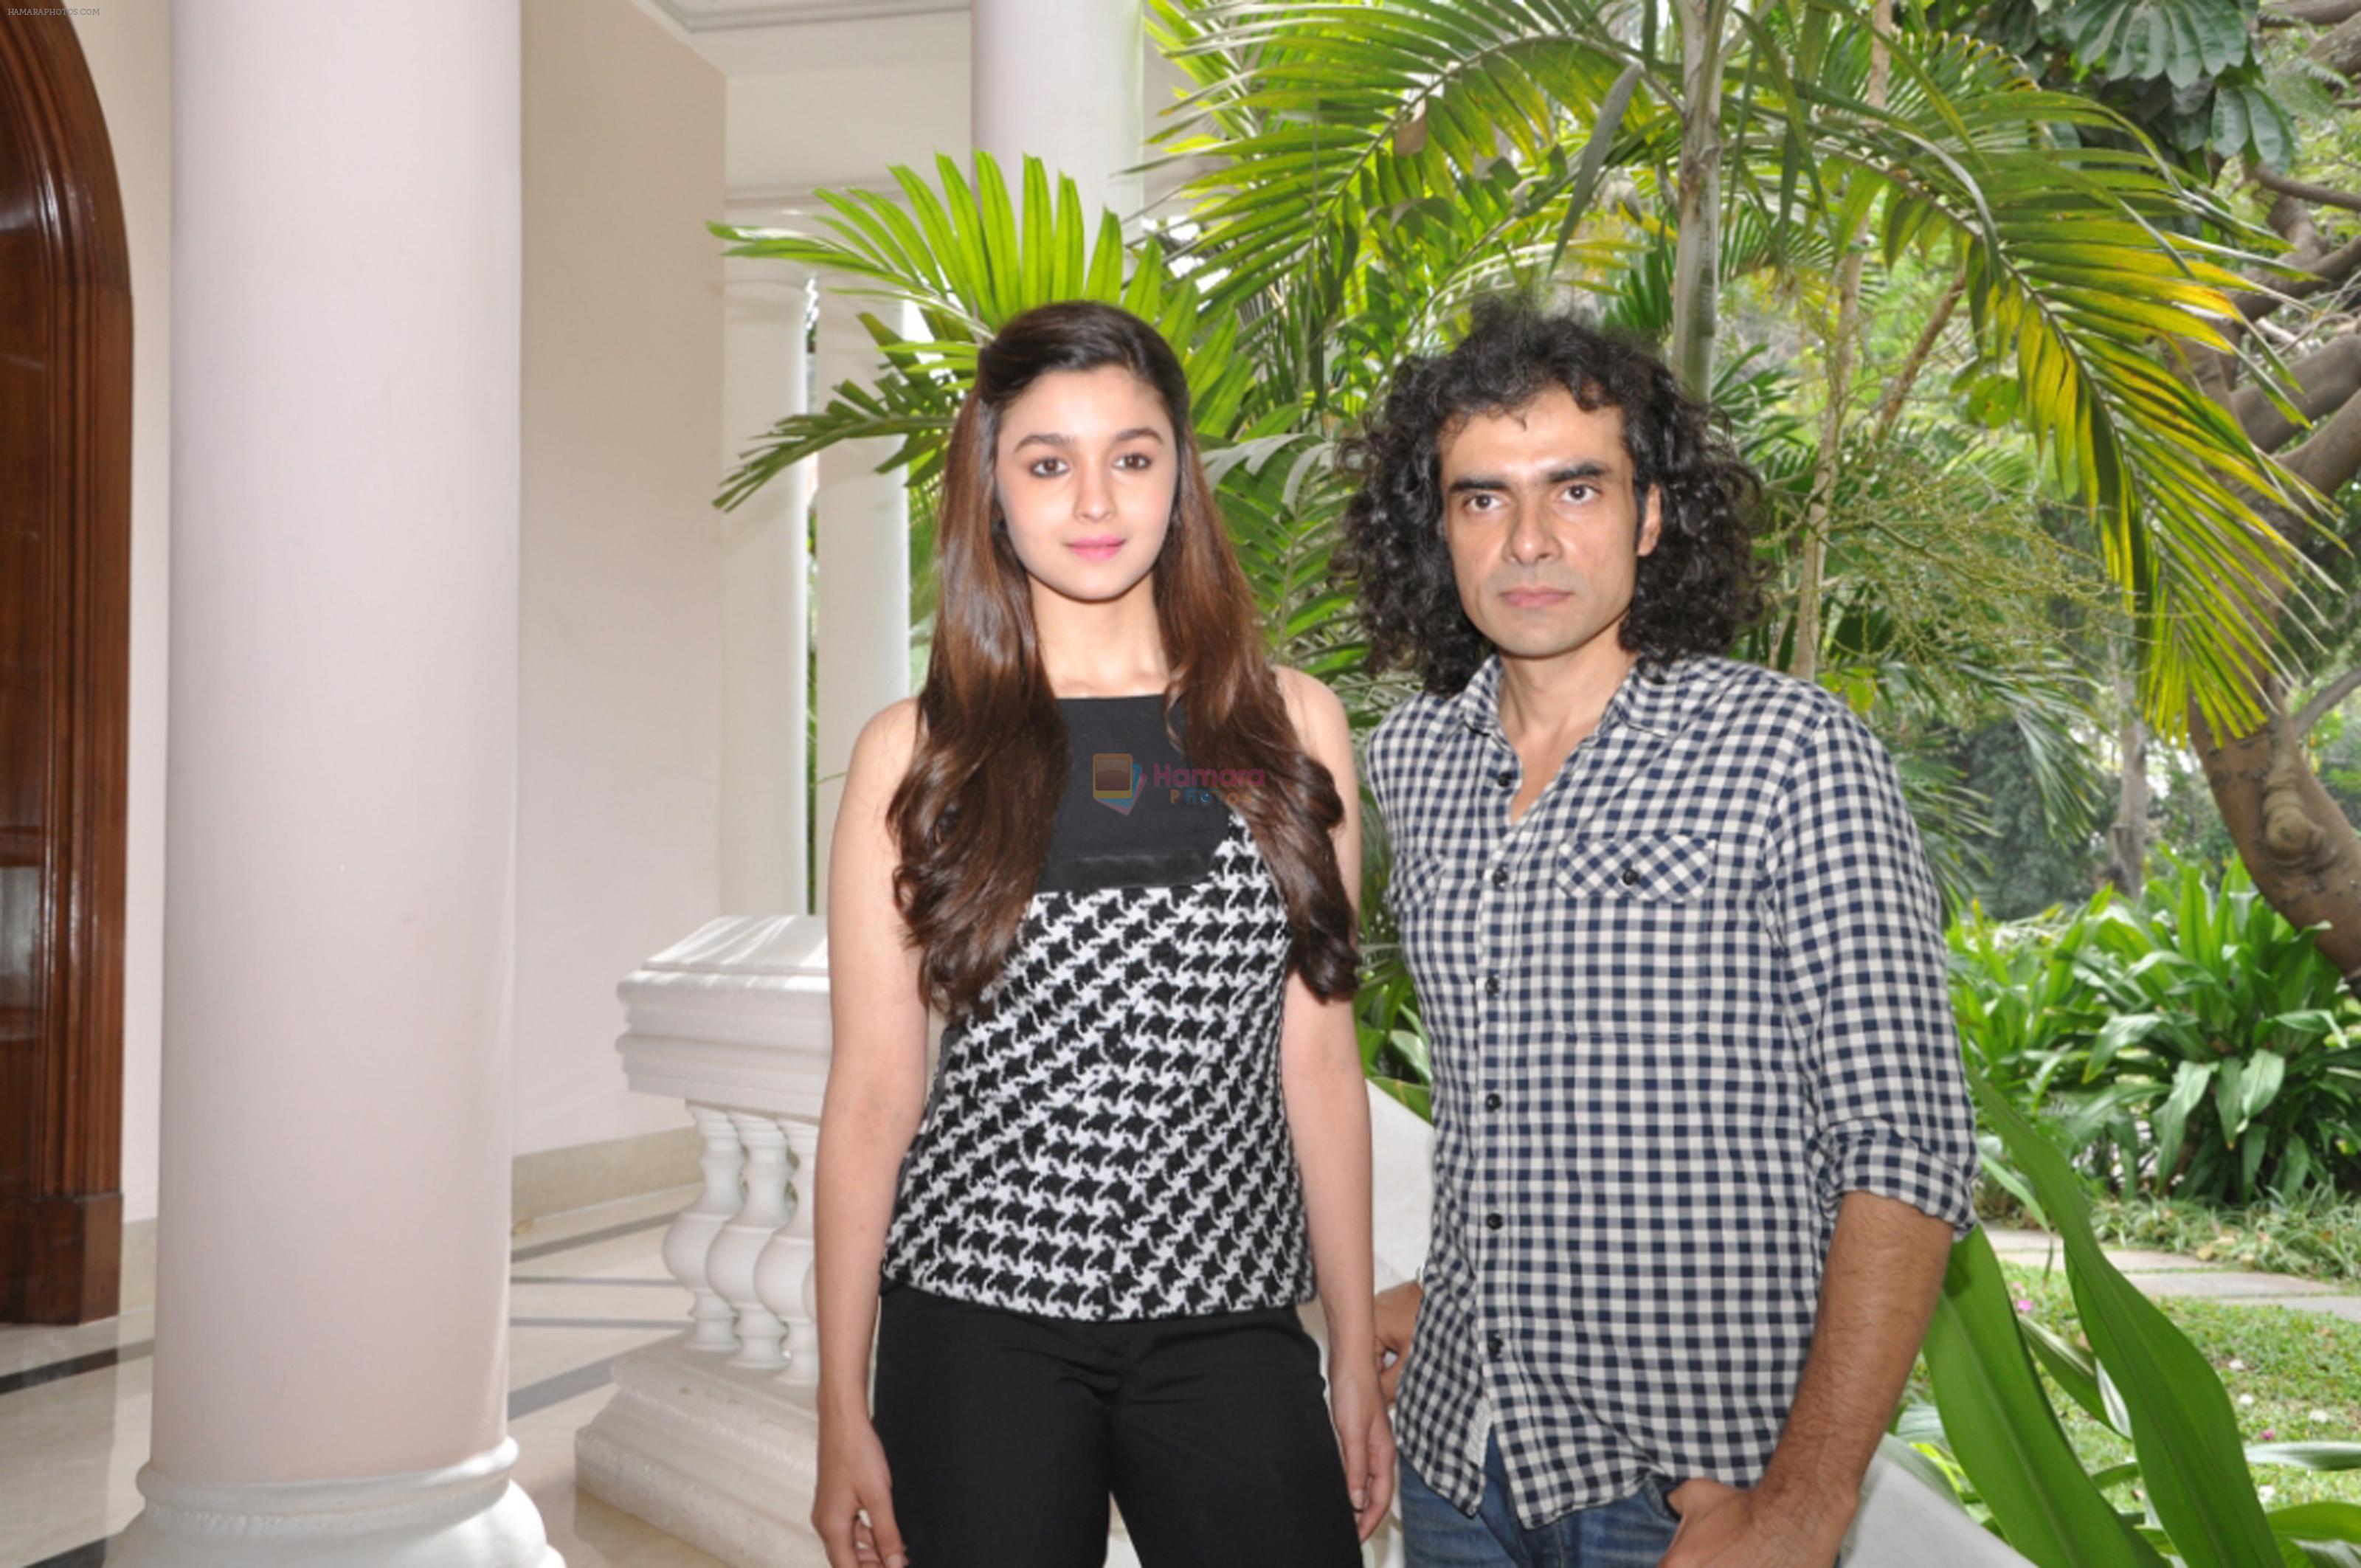 Imtiaz Ali, Alia Bhatt arrived in Bengaluru City for the launch of the movie HIGHWAY on 18th Feb 2014